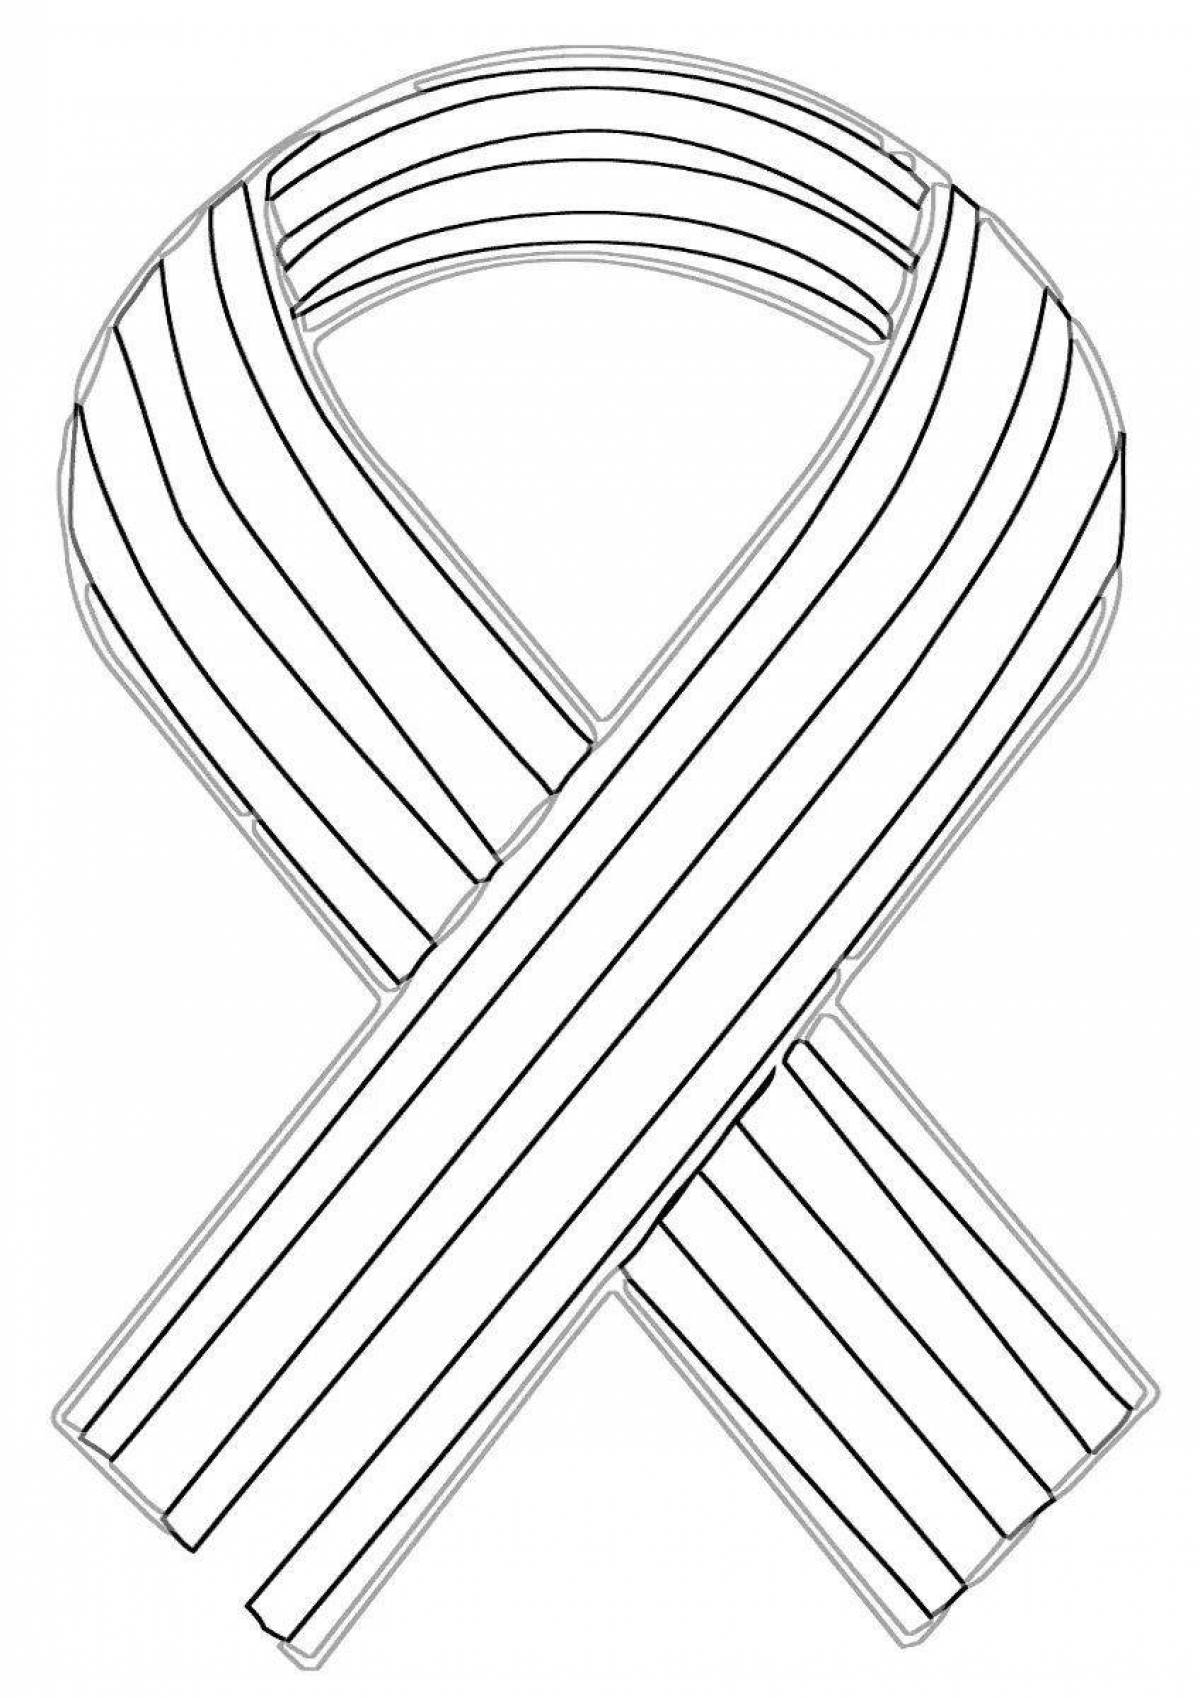 Bright drawing of St. George ribbon